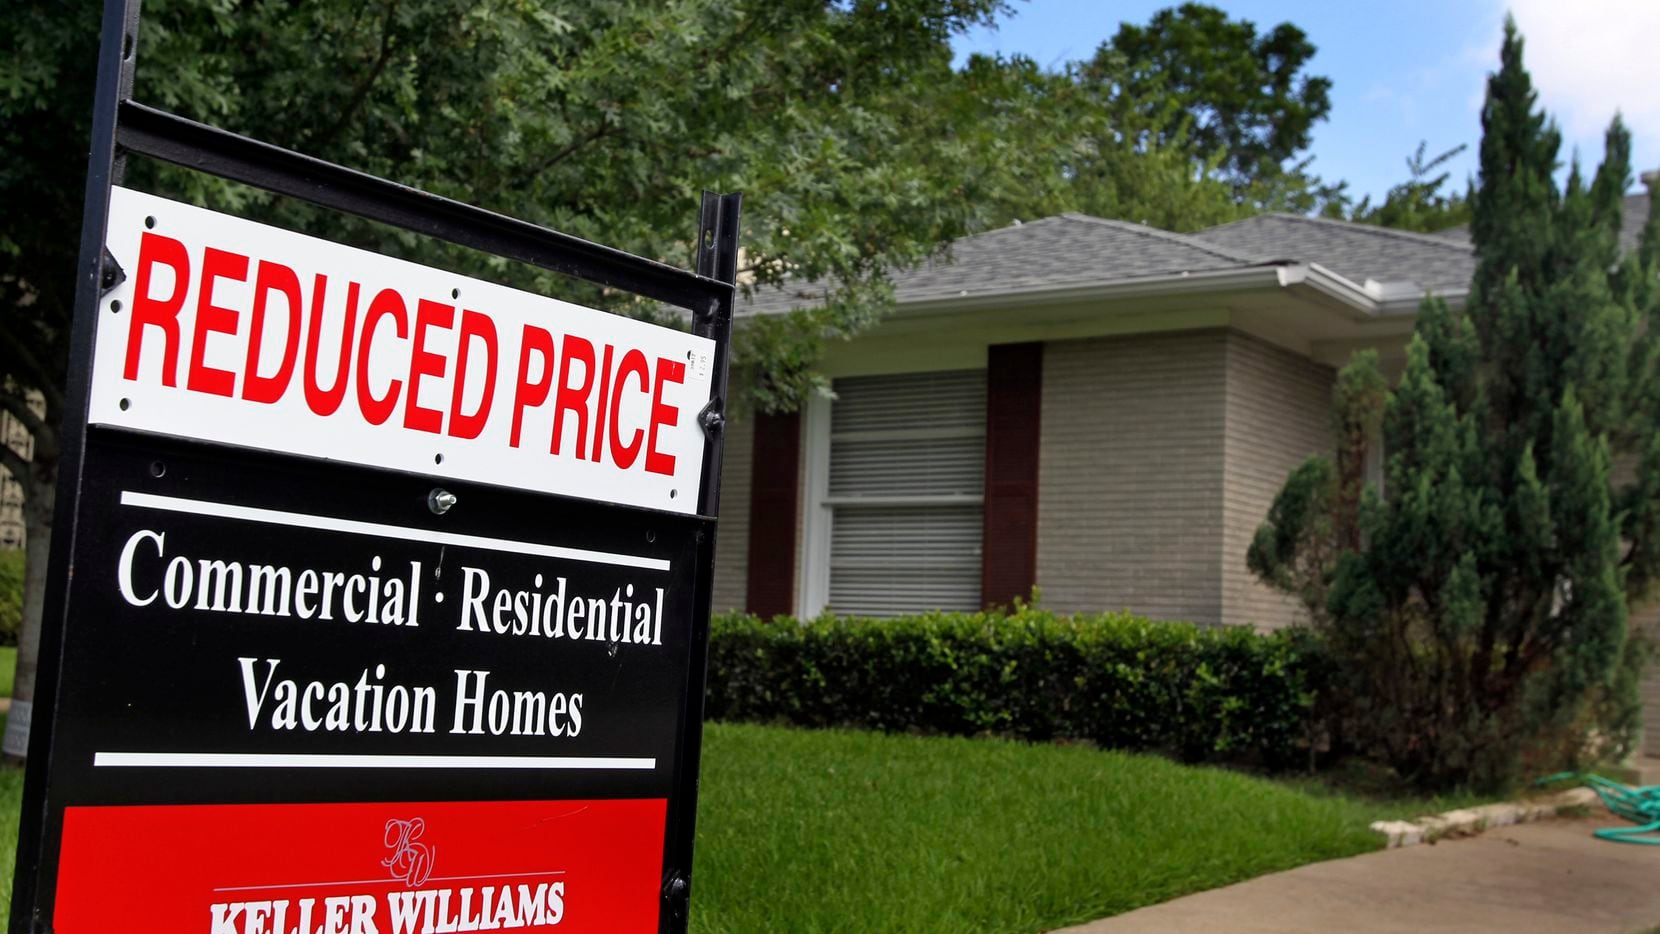 Median home prices in North Texas are down 3% from a year ago.